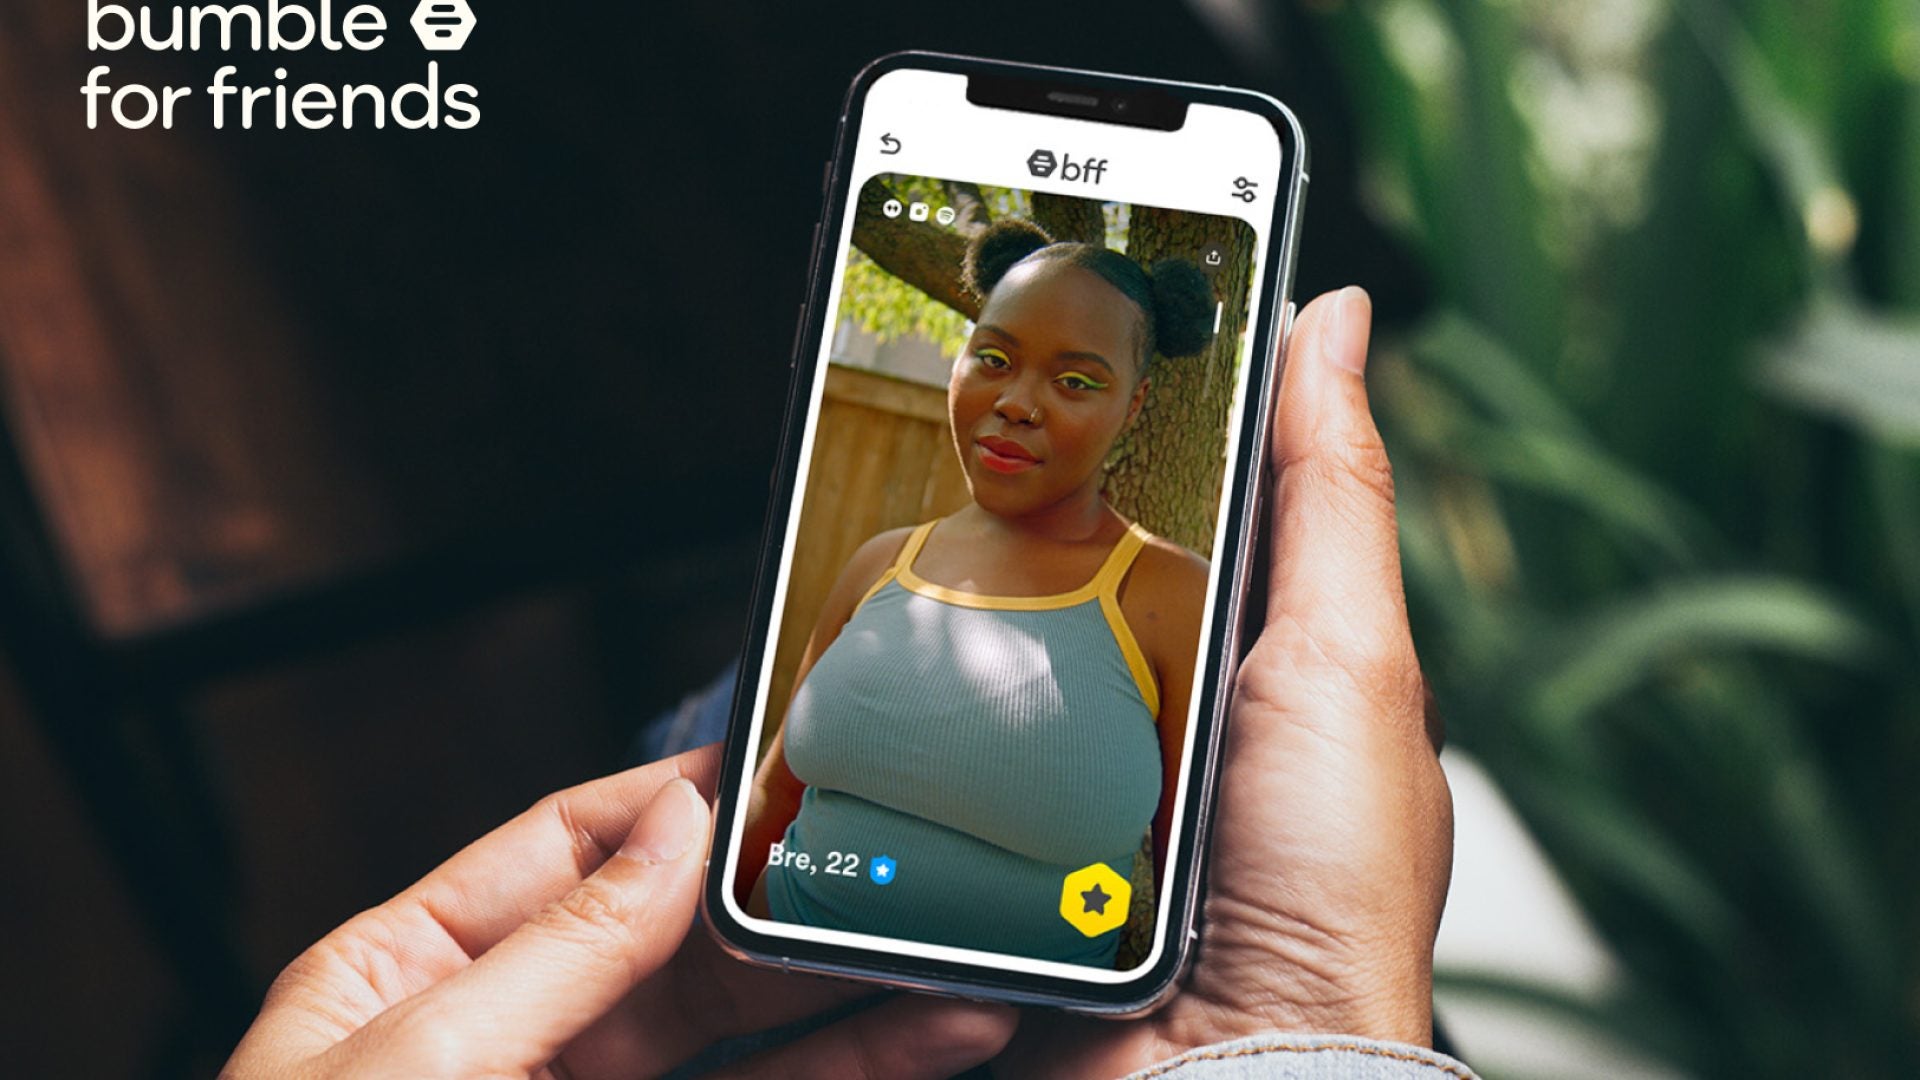 Looking For More Community? Bumble Inc. Introduces ‘Bumble For Friends’